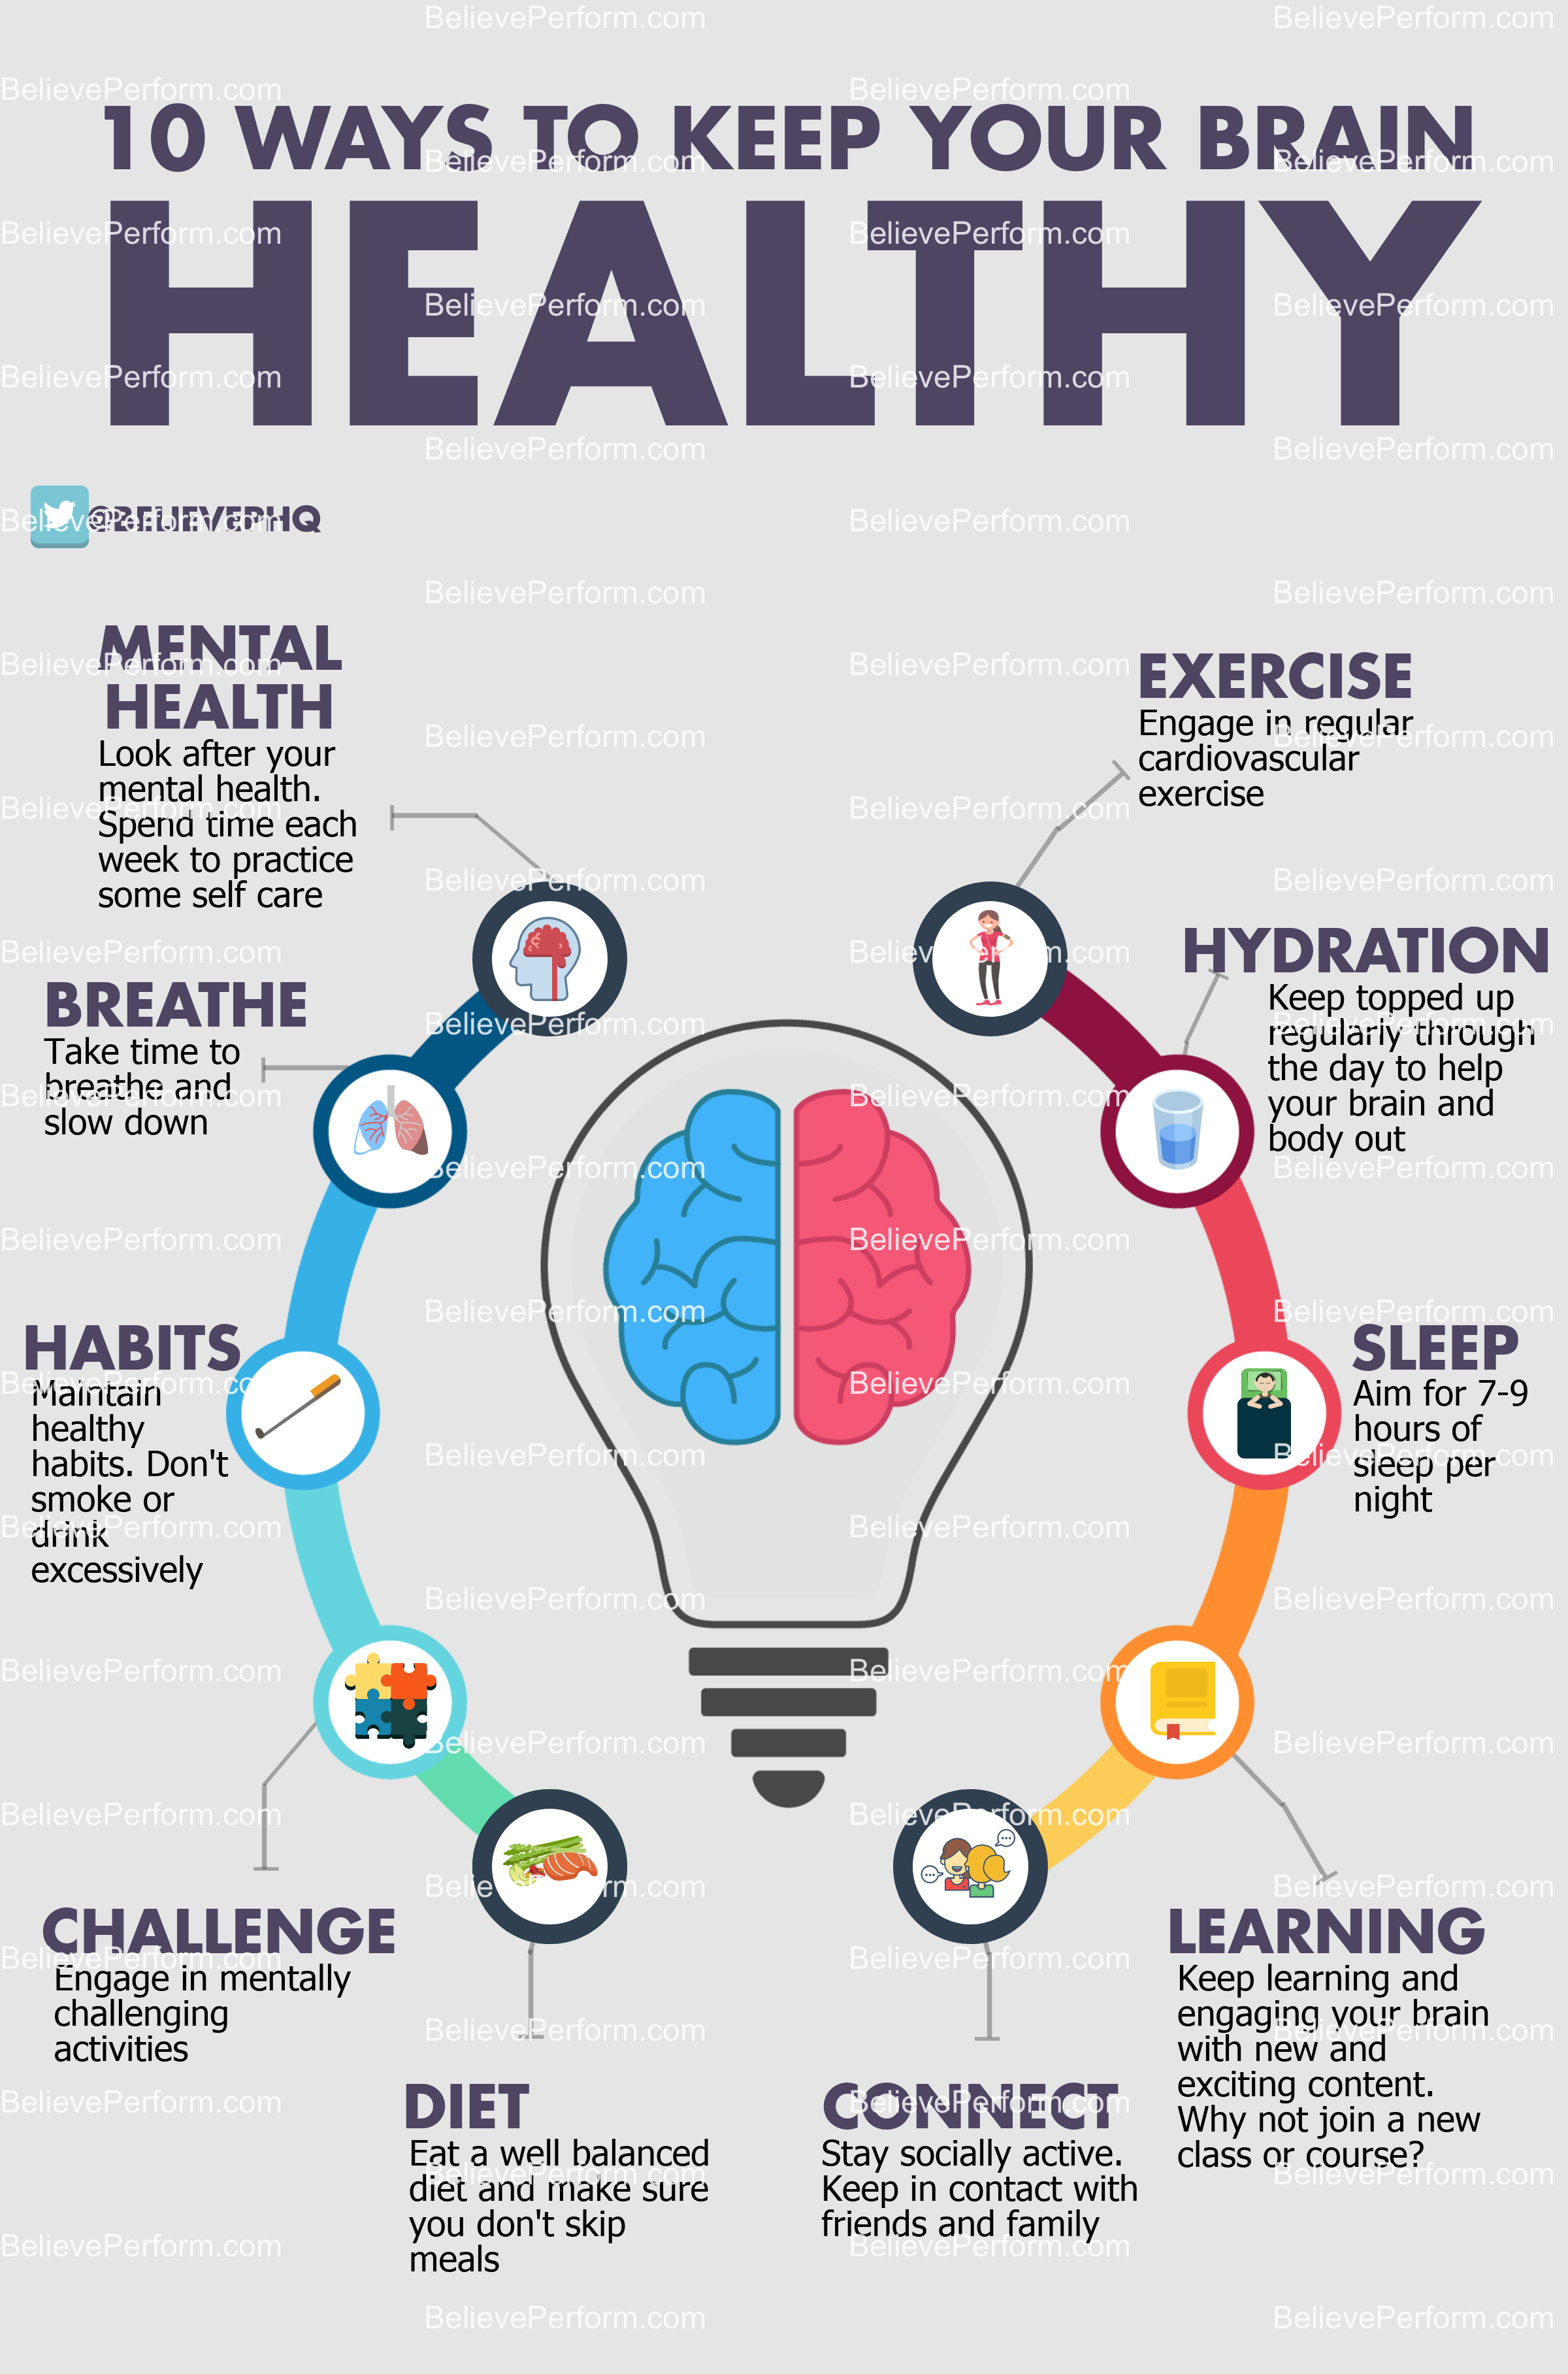 10-ways-to-keep-your-brain-healthy-the-uk-s-leading-sports-psychology